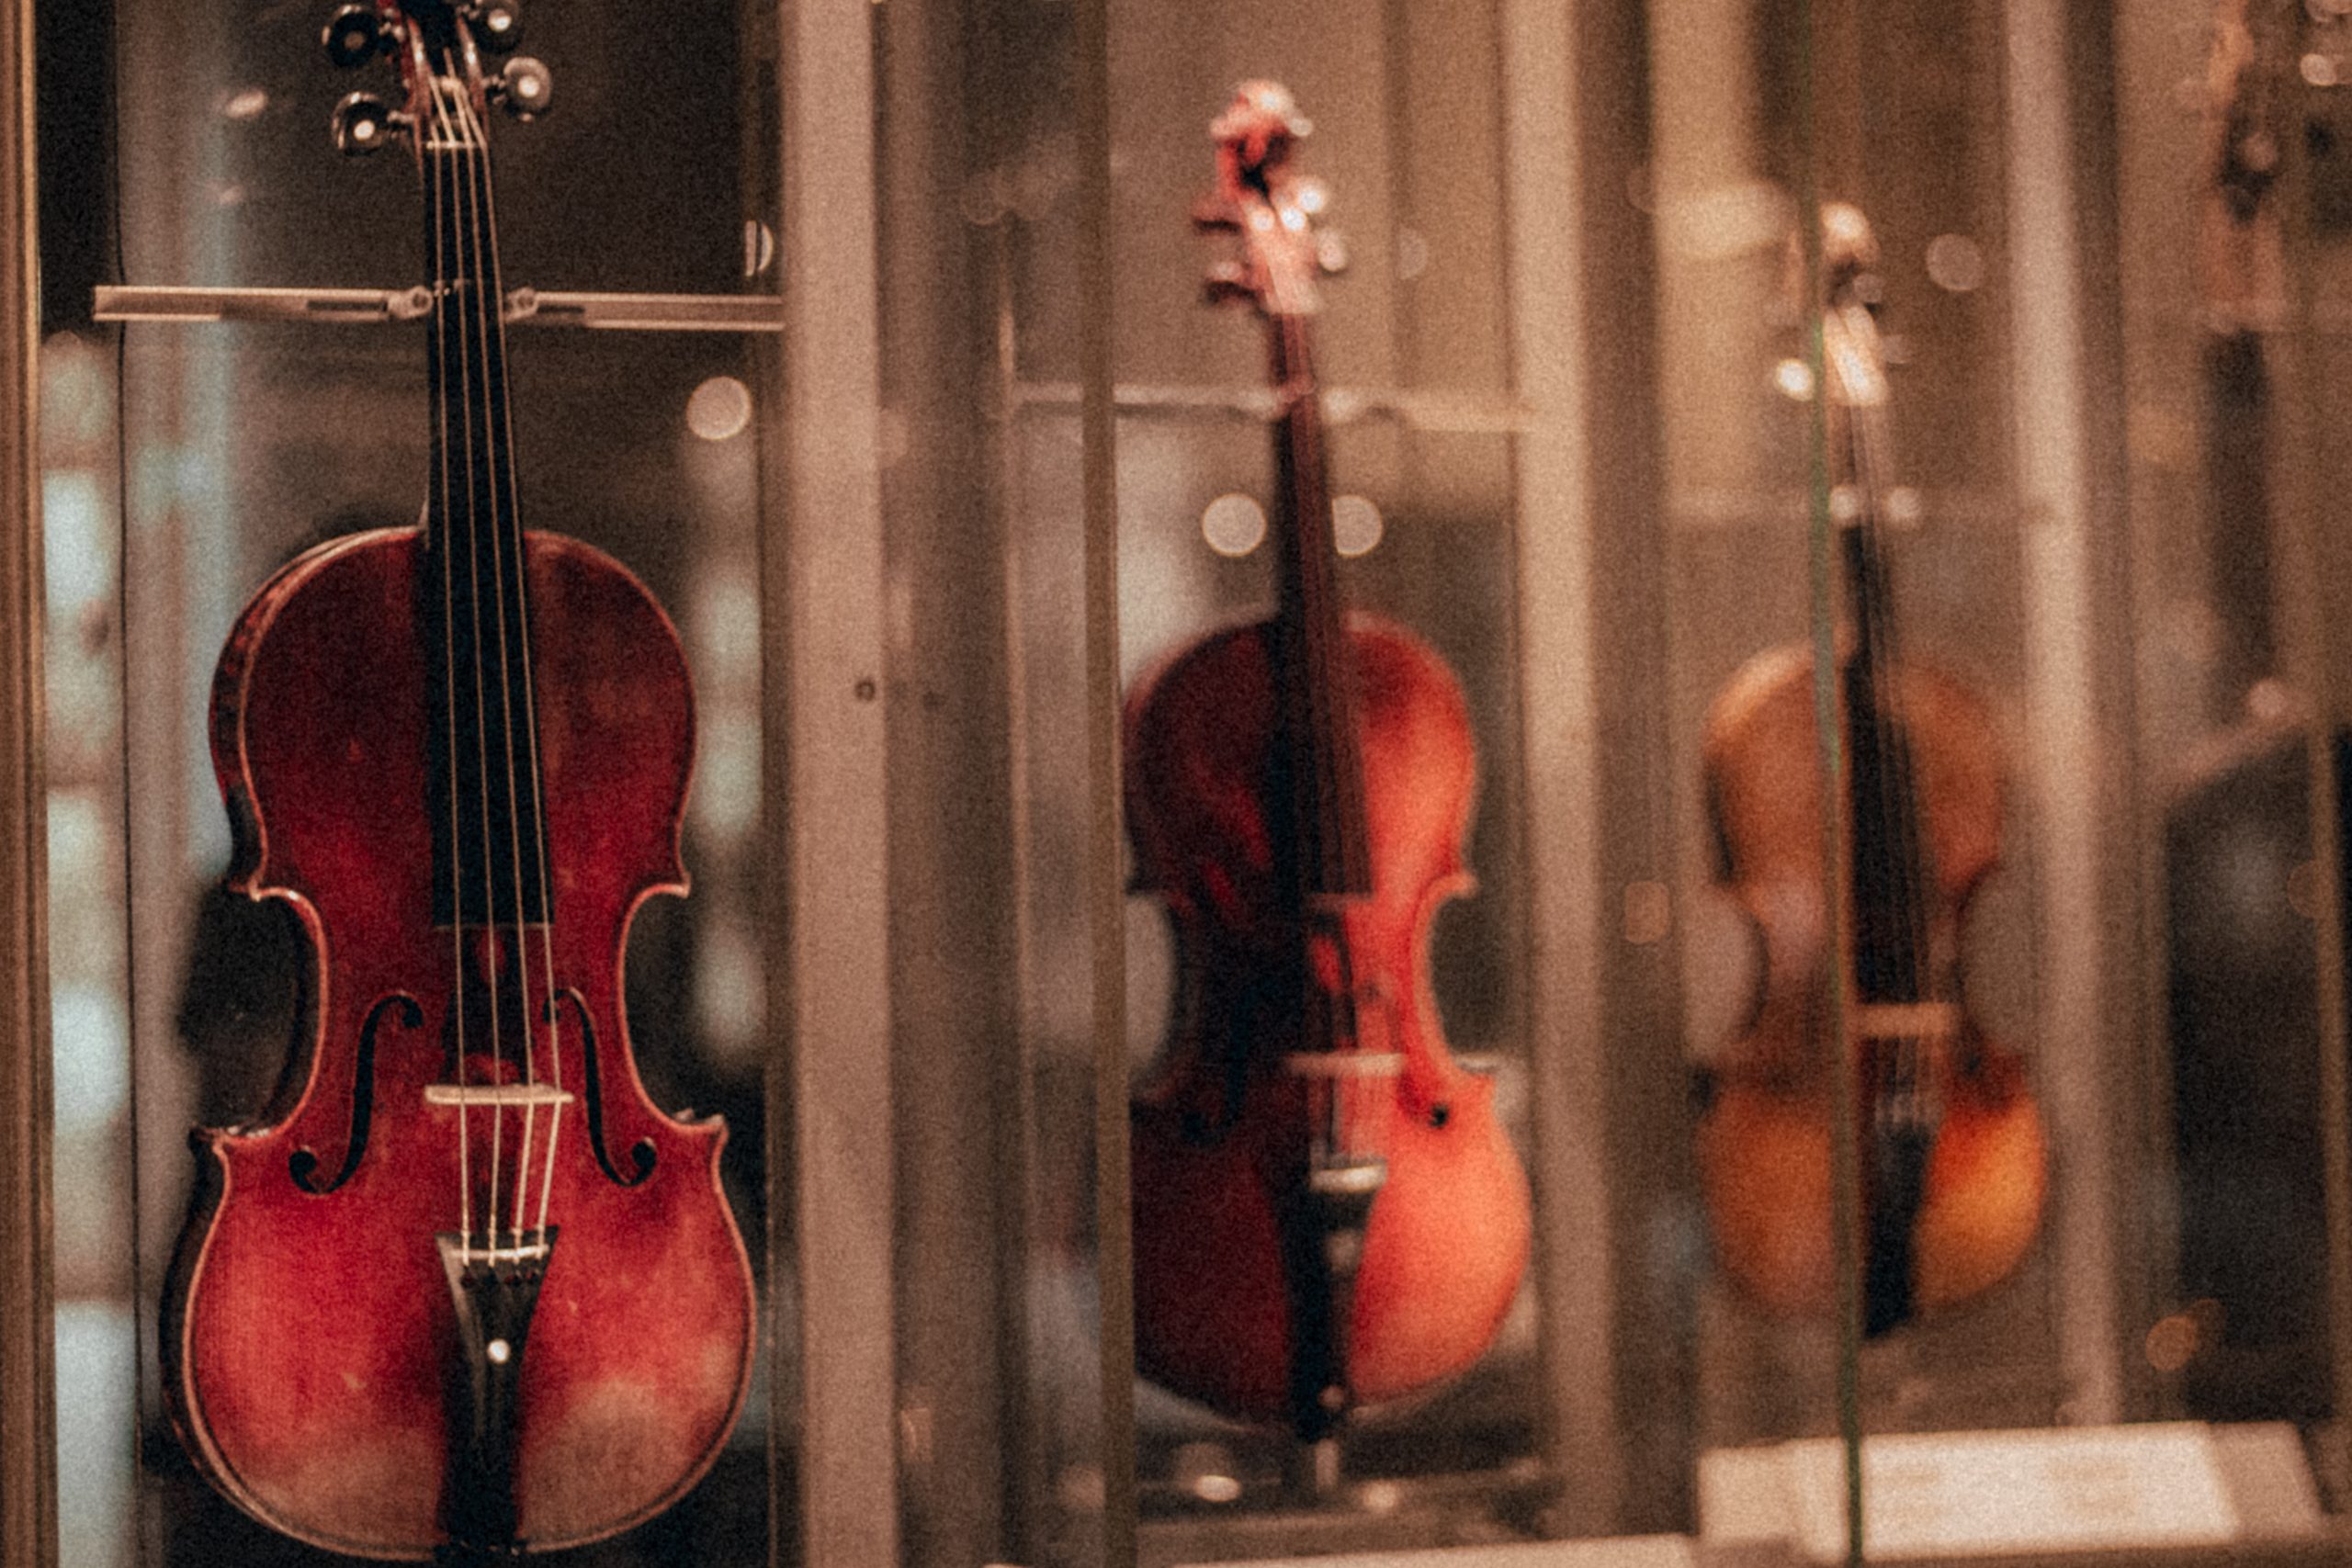 Best Violin for Beginners: Top 15 Brands | TakeLessons Blog